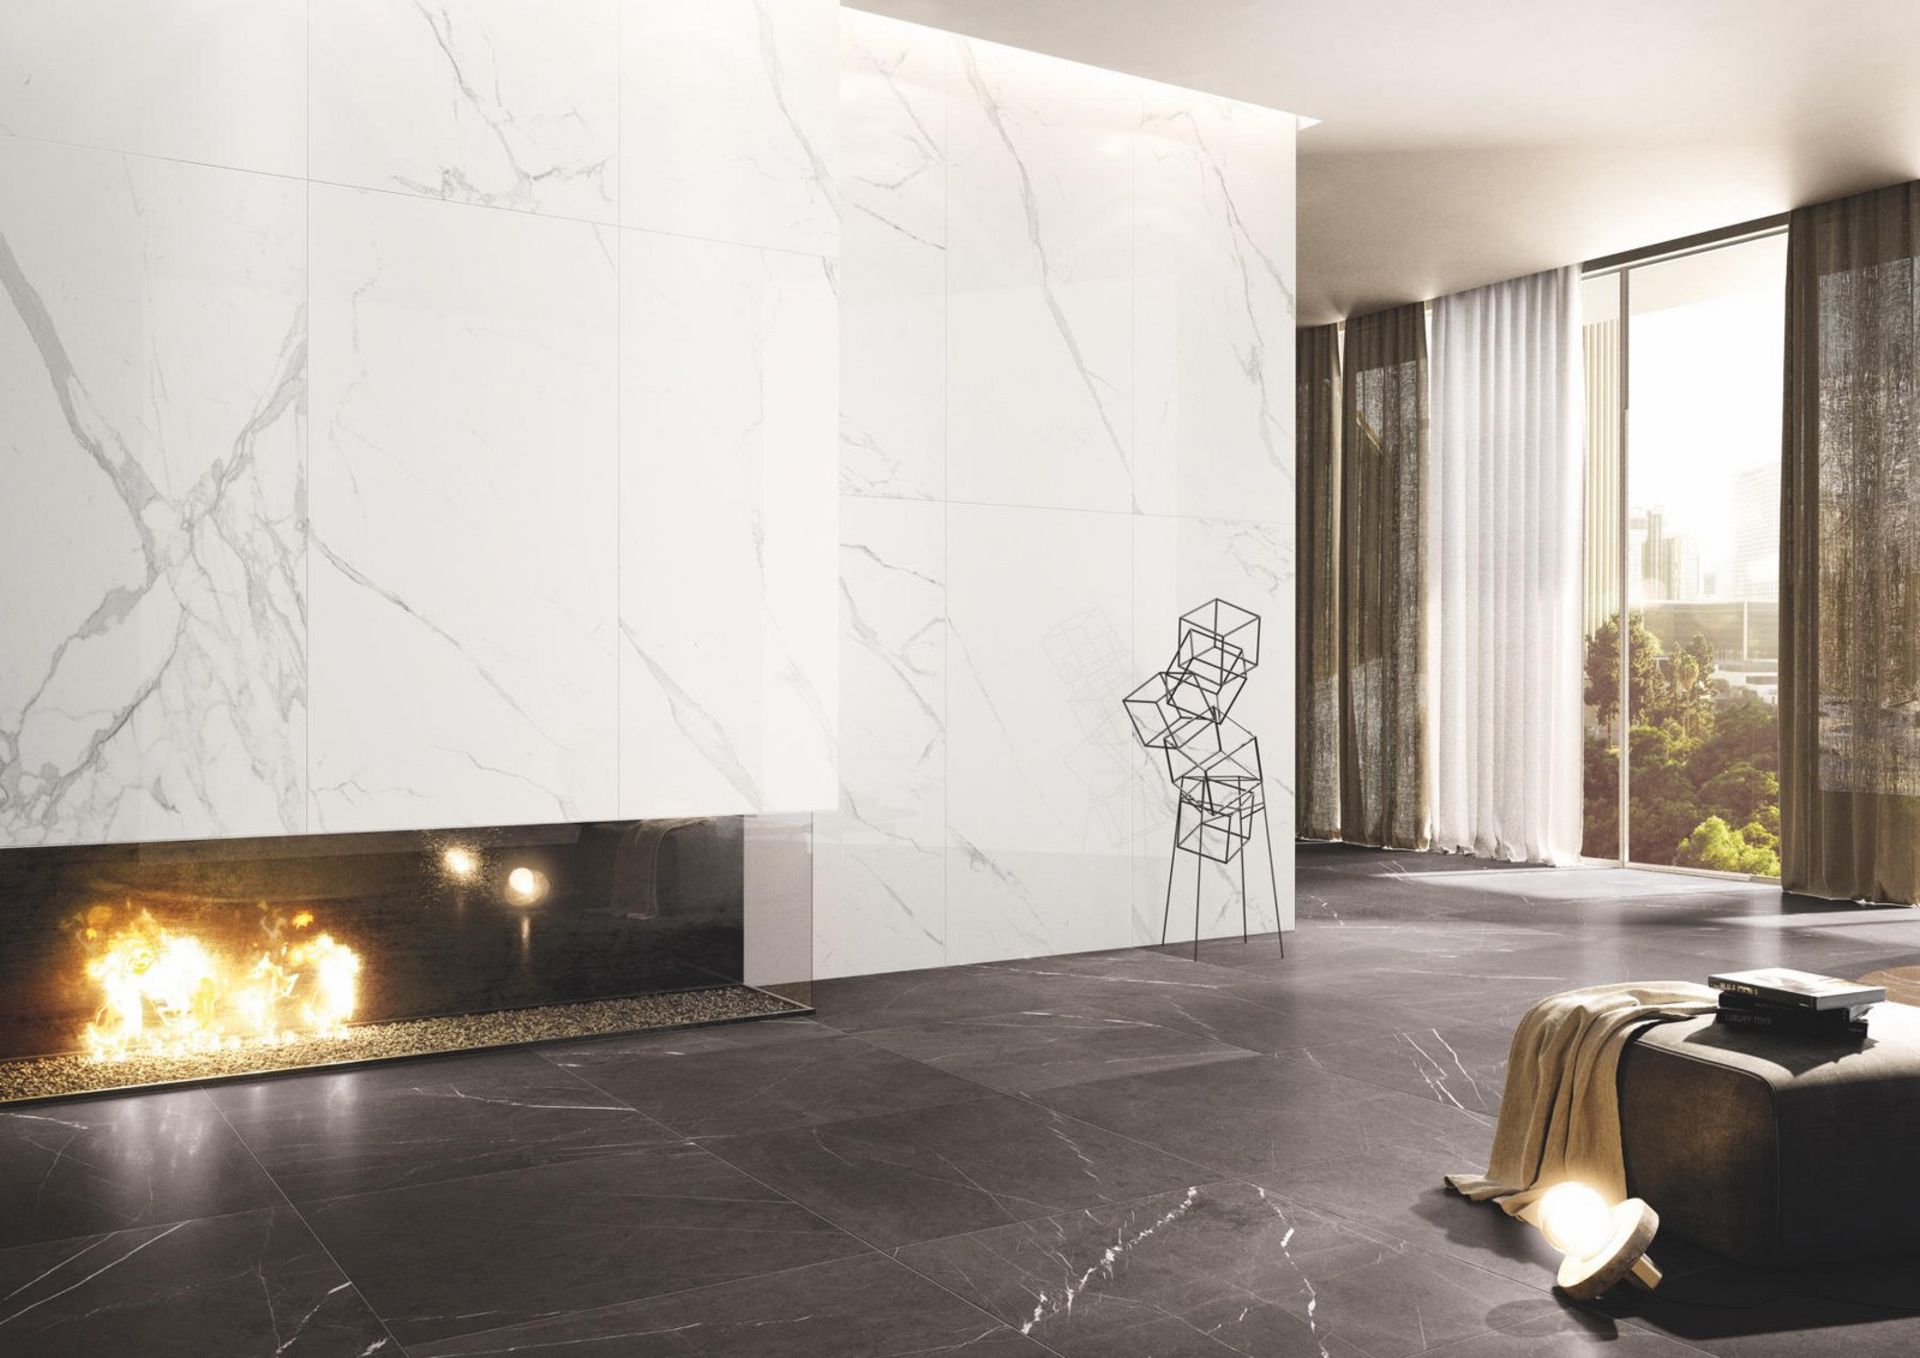 12"X24" MARMOKER STATUARIO GRIGIO COLOUR BODY GLAZED PORCELAIN POLISHED TILE MADE IN ITALY BY - Image 4 of 5